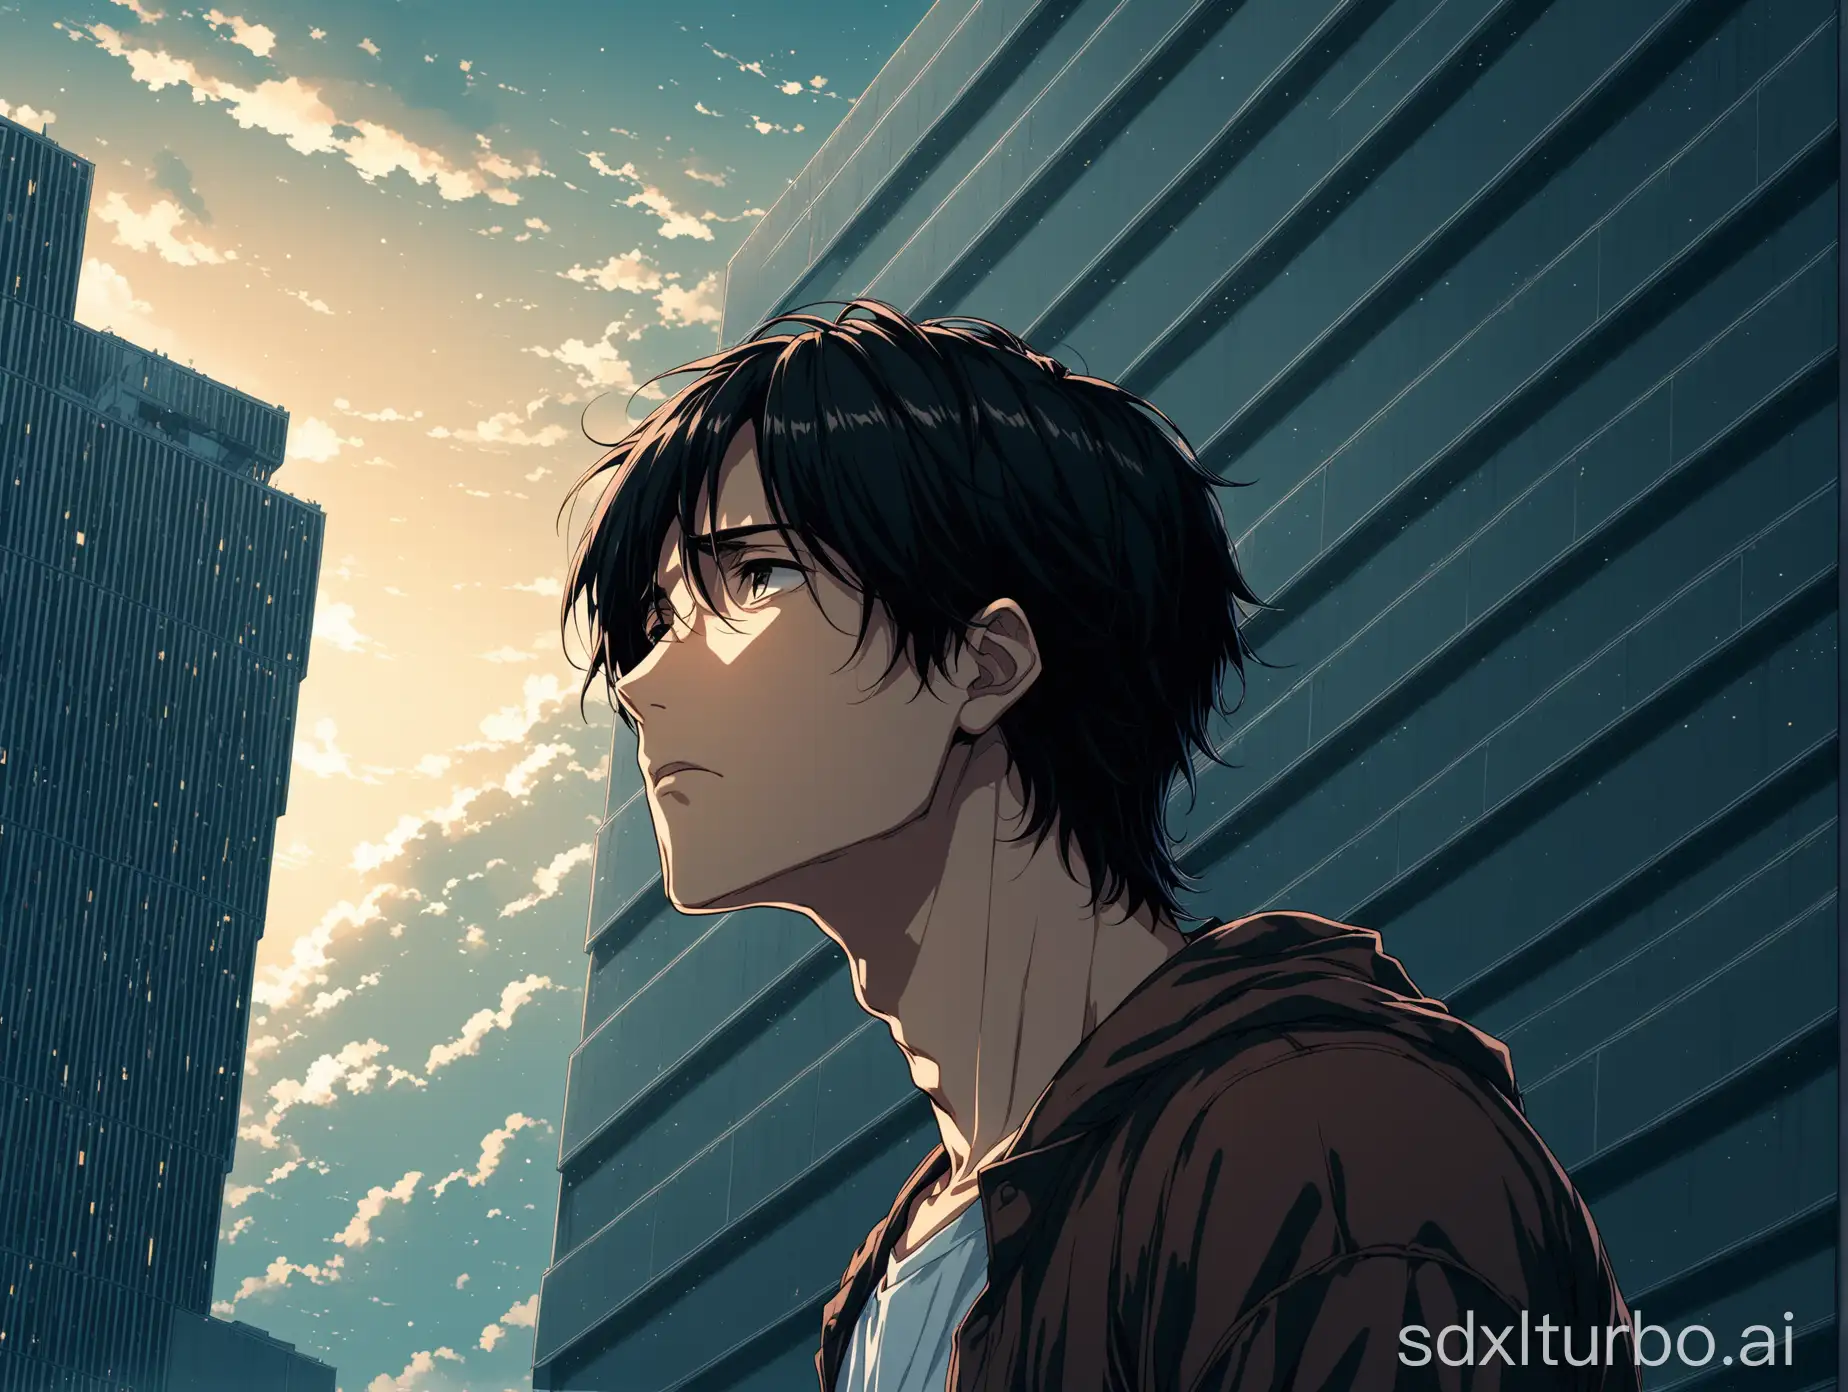 Depressed-DarkHaired-Male-Anime-Character-Contemplating-Modern-Cityscape